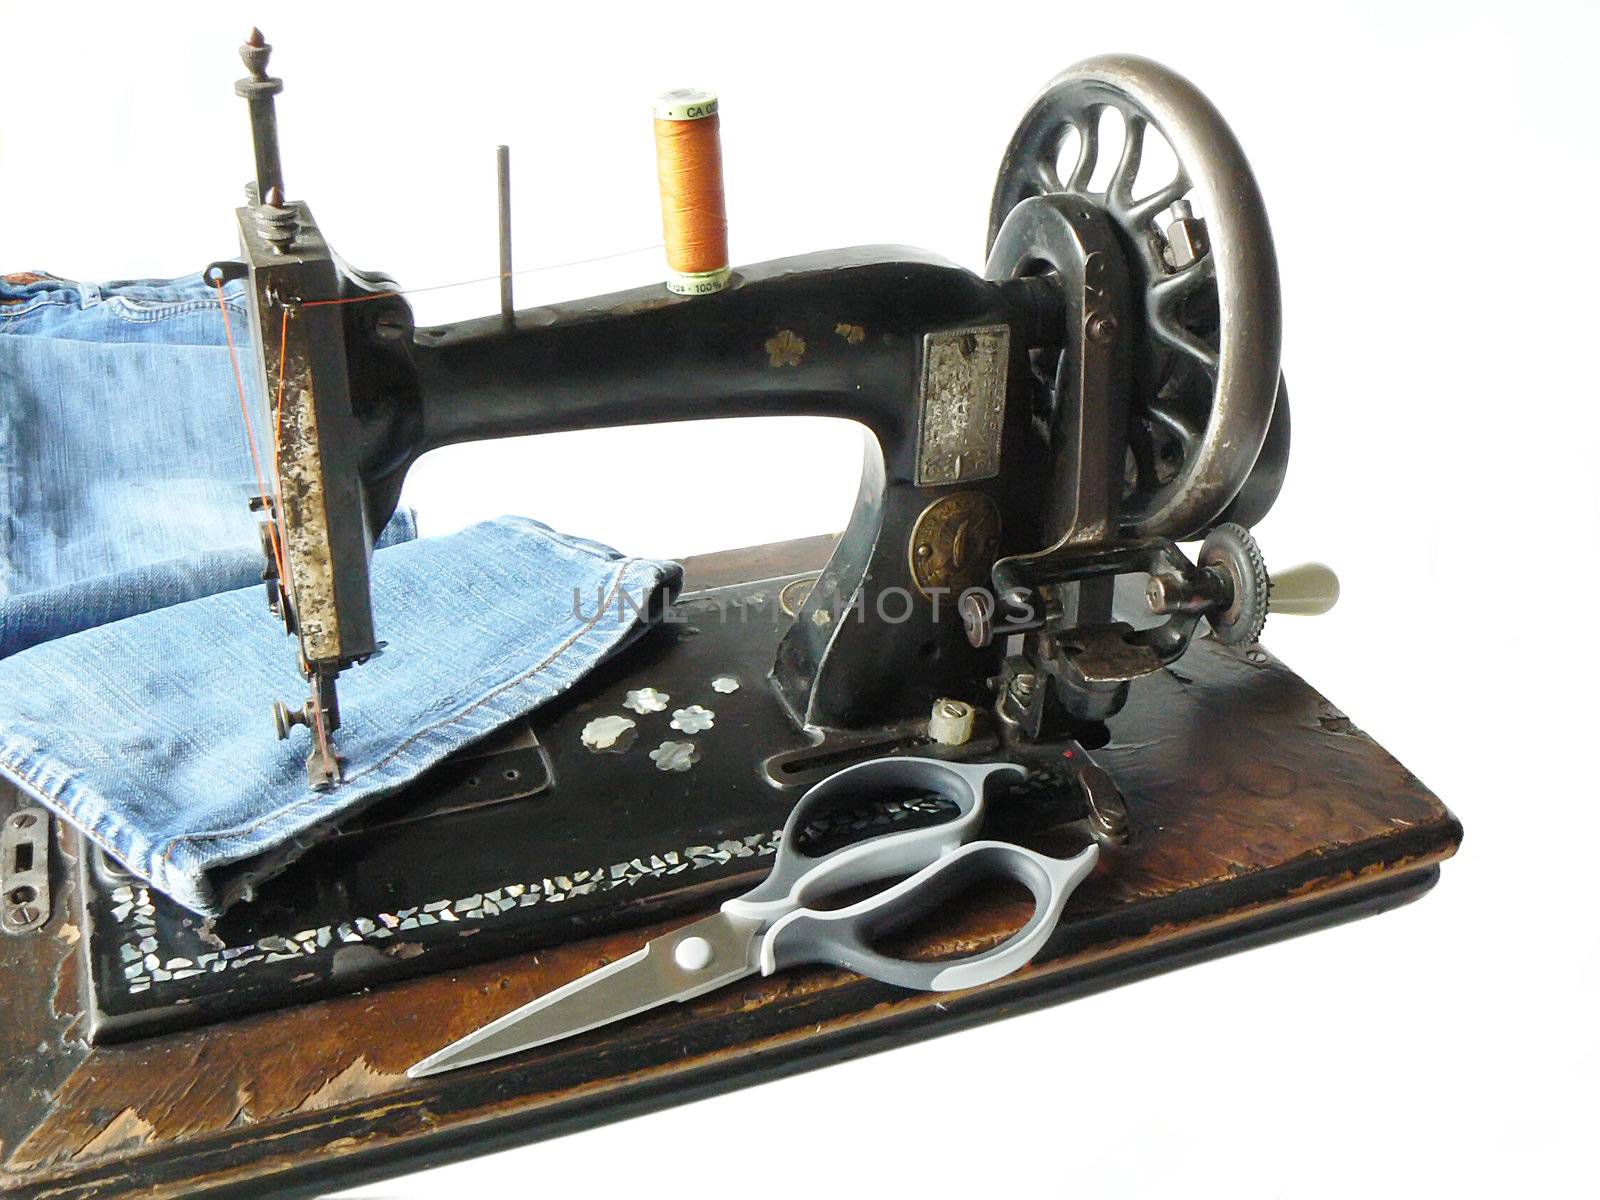 Vintage sewing machine and modern jeans